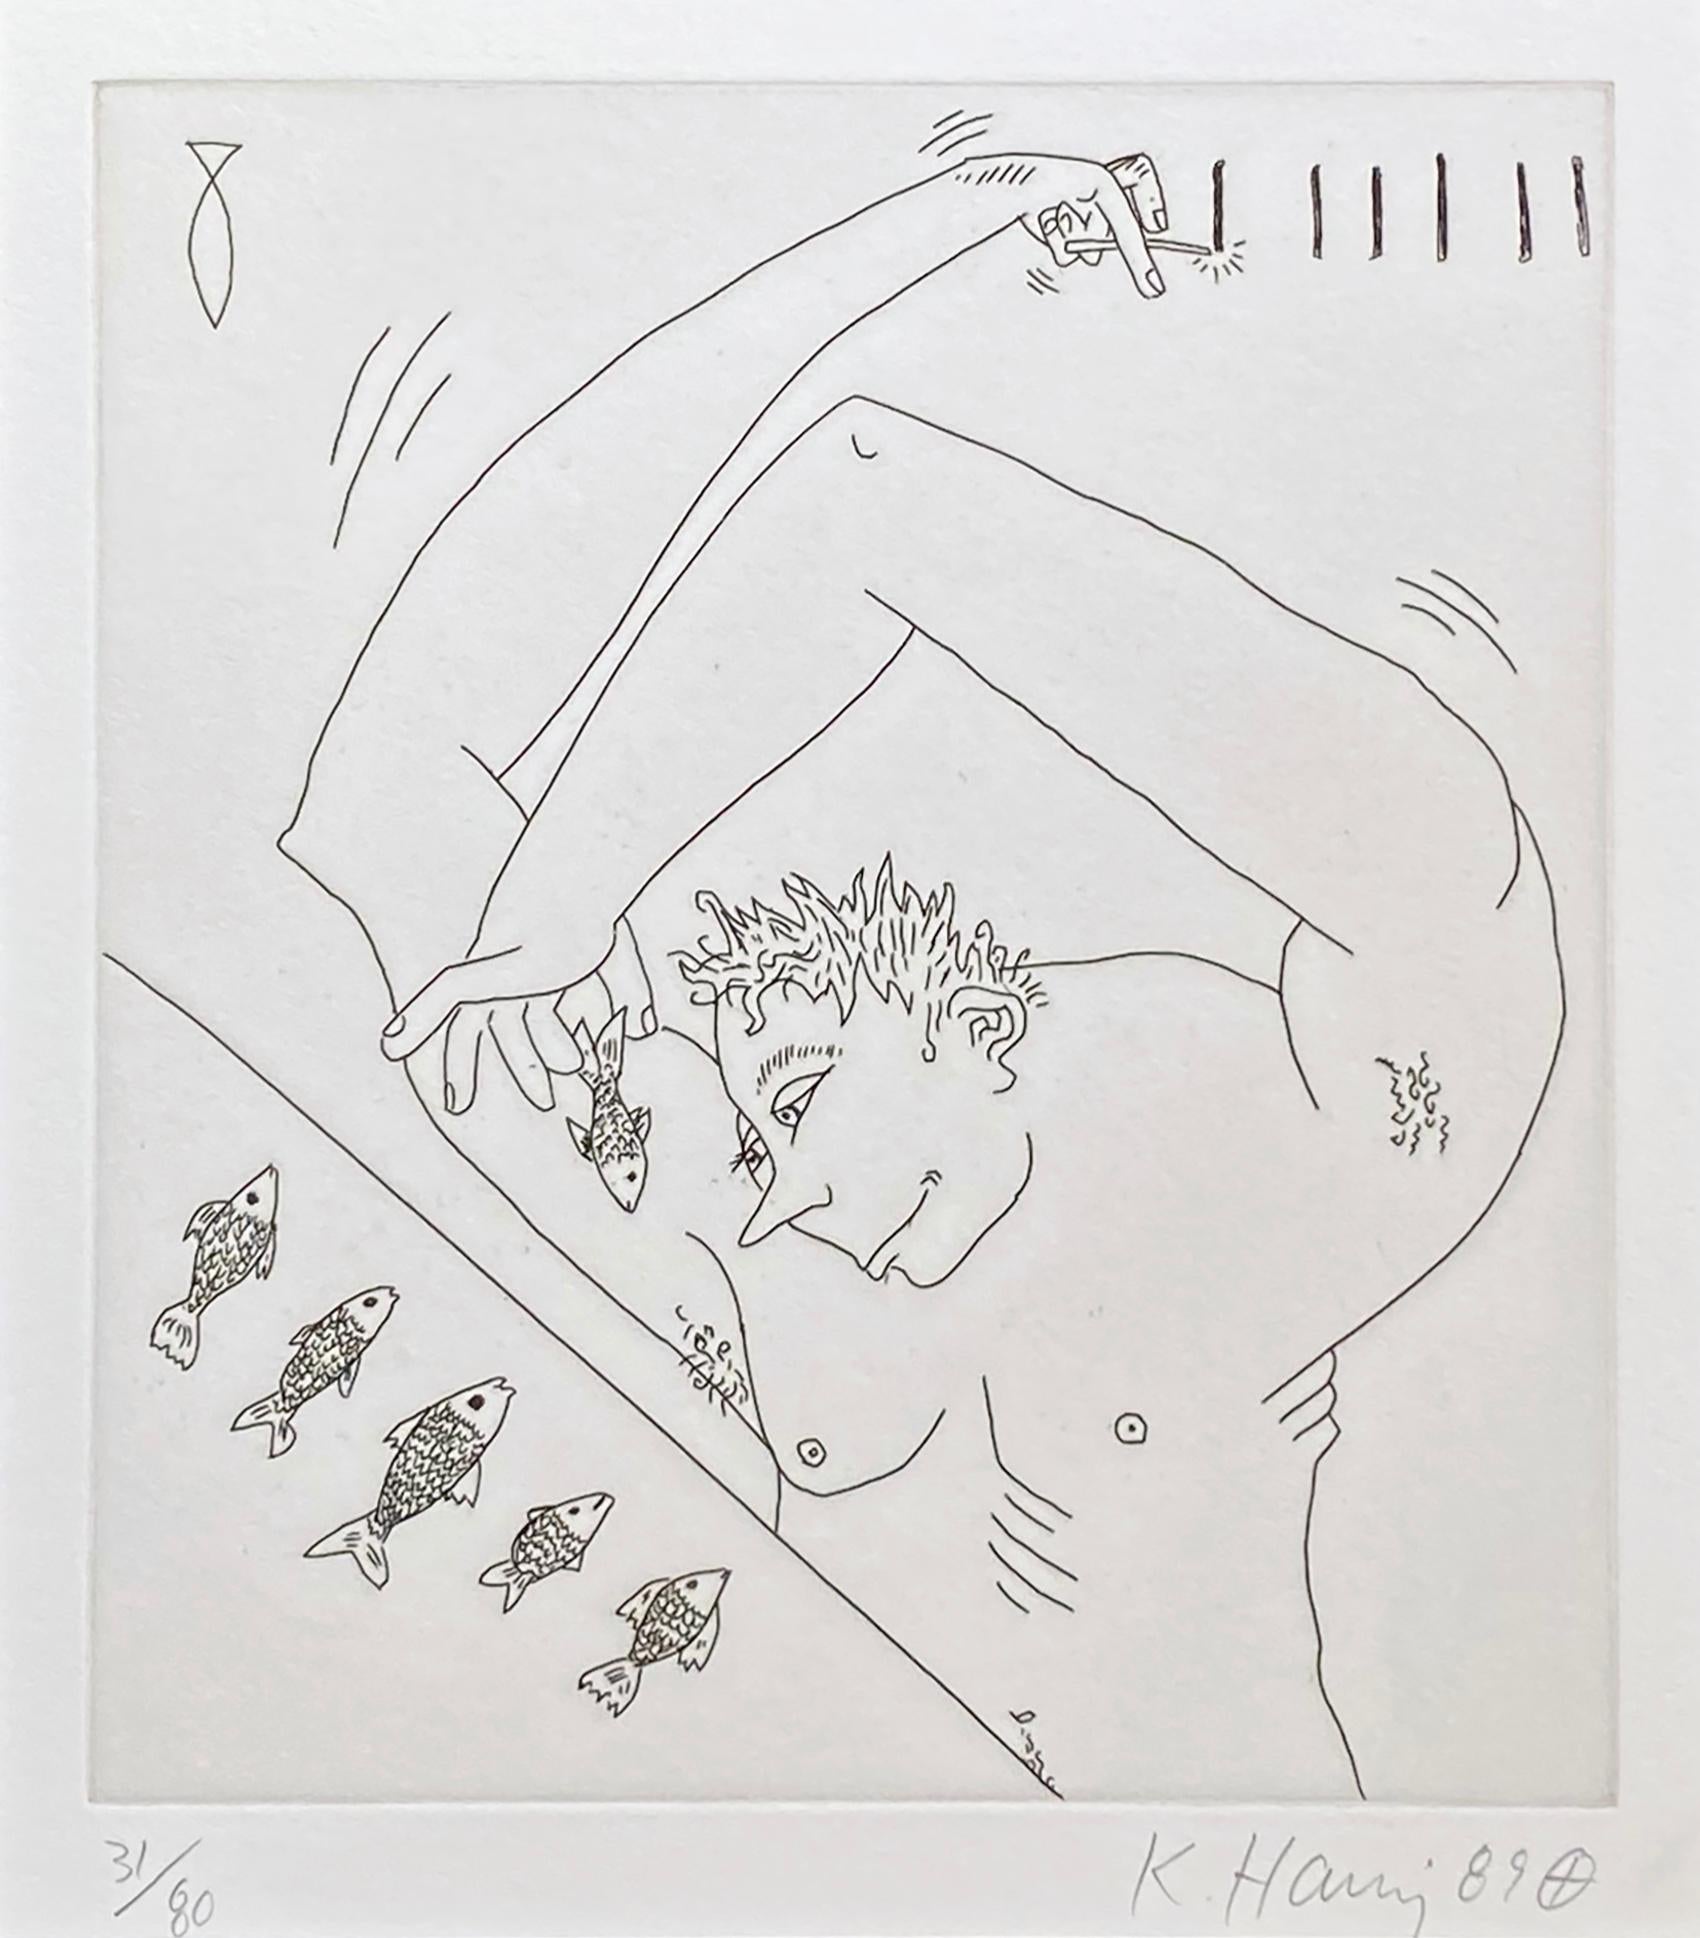 Keith Haring Figurative Print - Figure and Fish (from The Valley Suite)